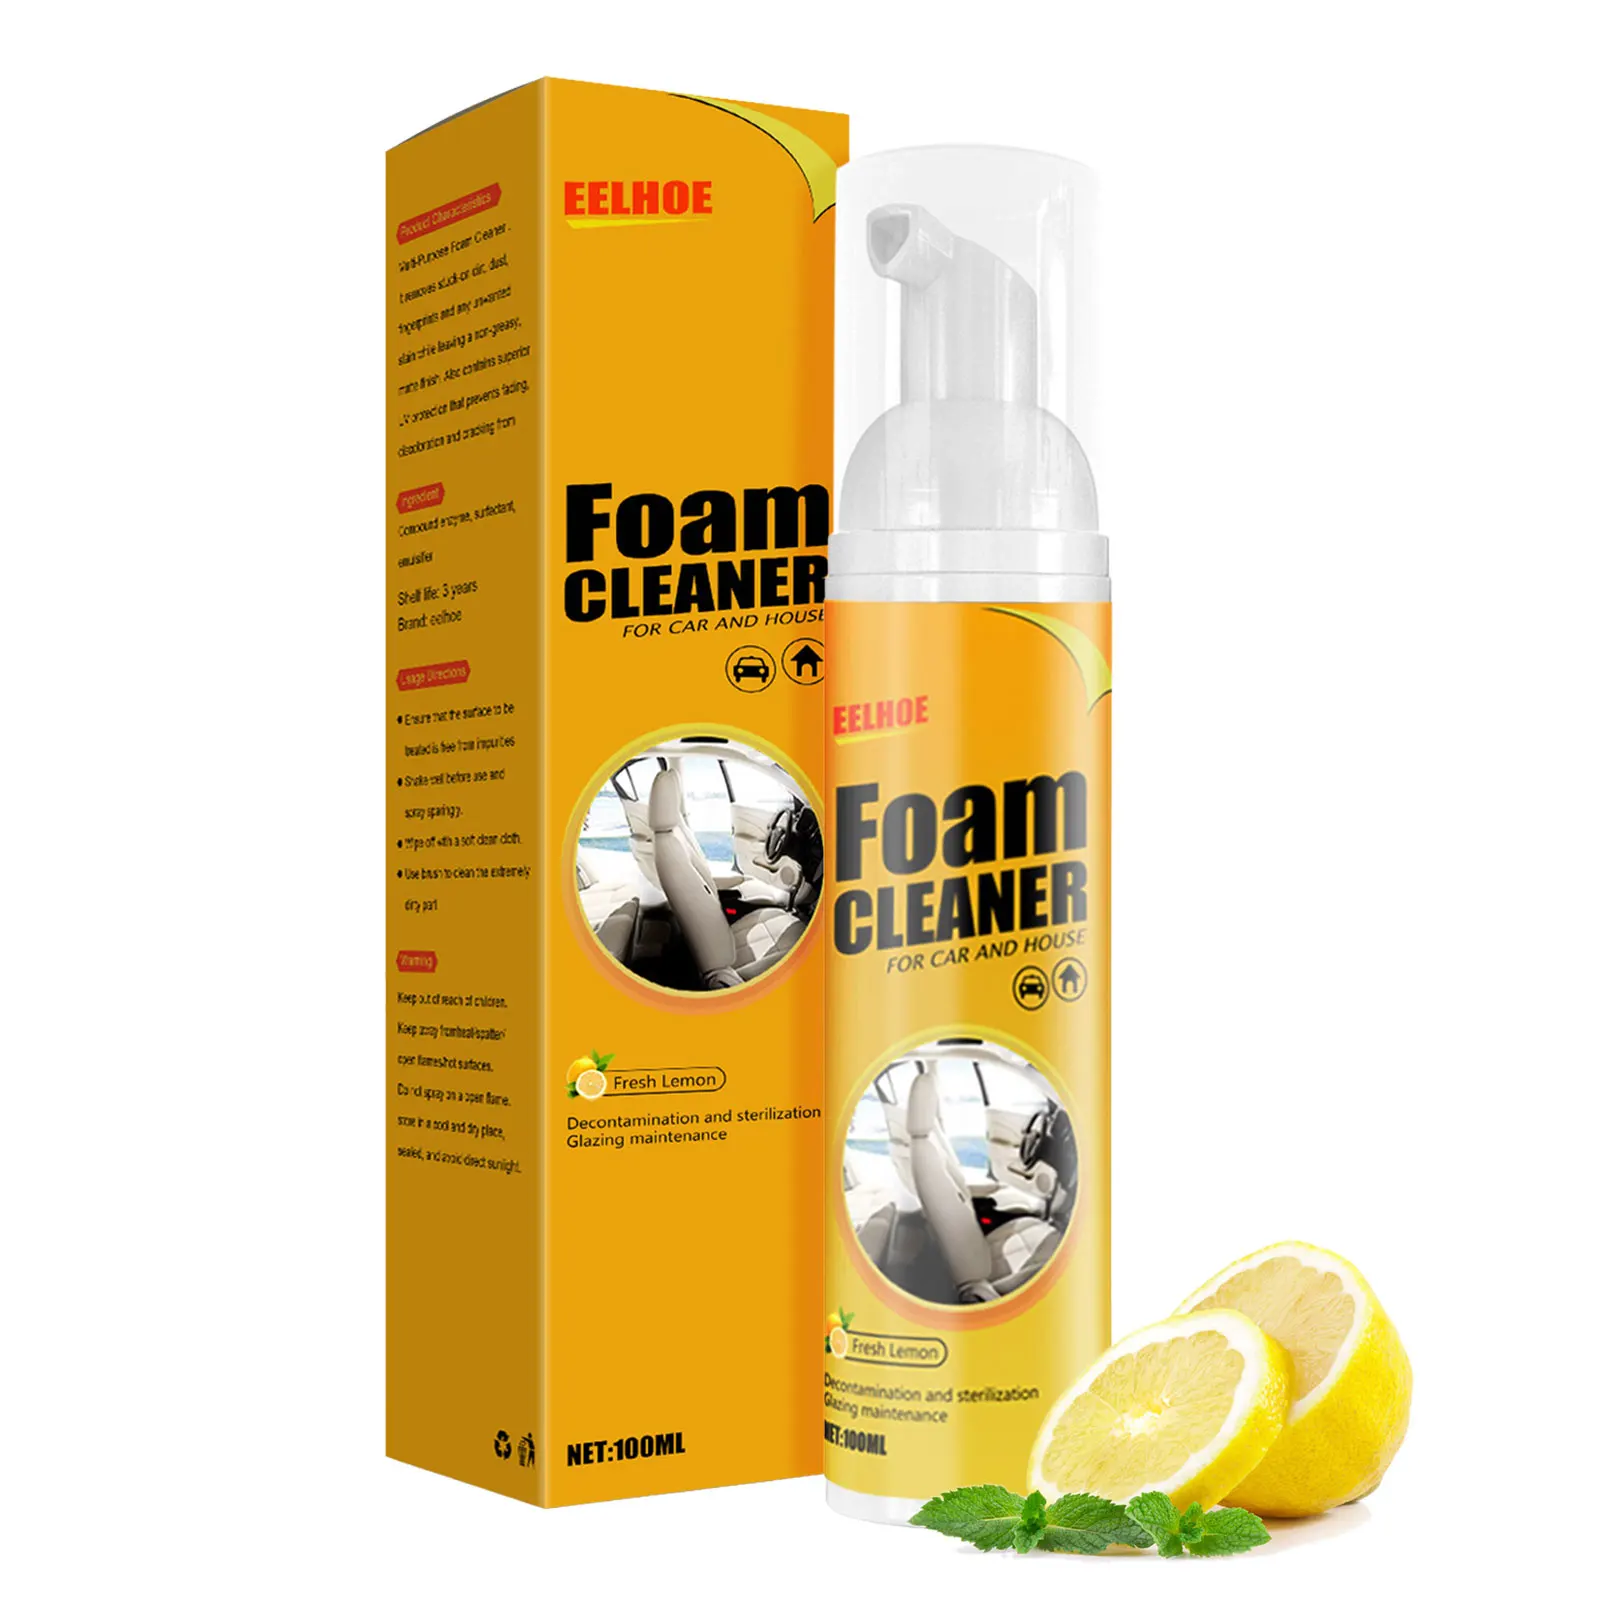 Multifunctional Foam Cleaner For Car Multipurpose Household Cleaners Strong Decontamination And Lemon Flavor Cleaning Sprays For